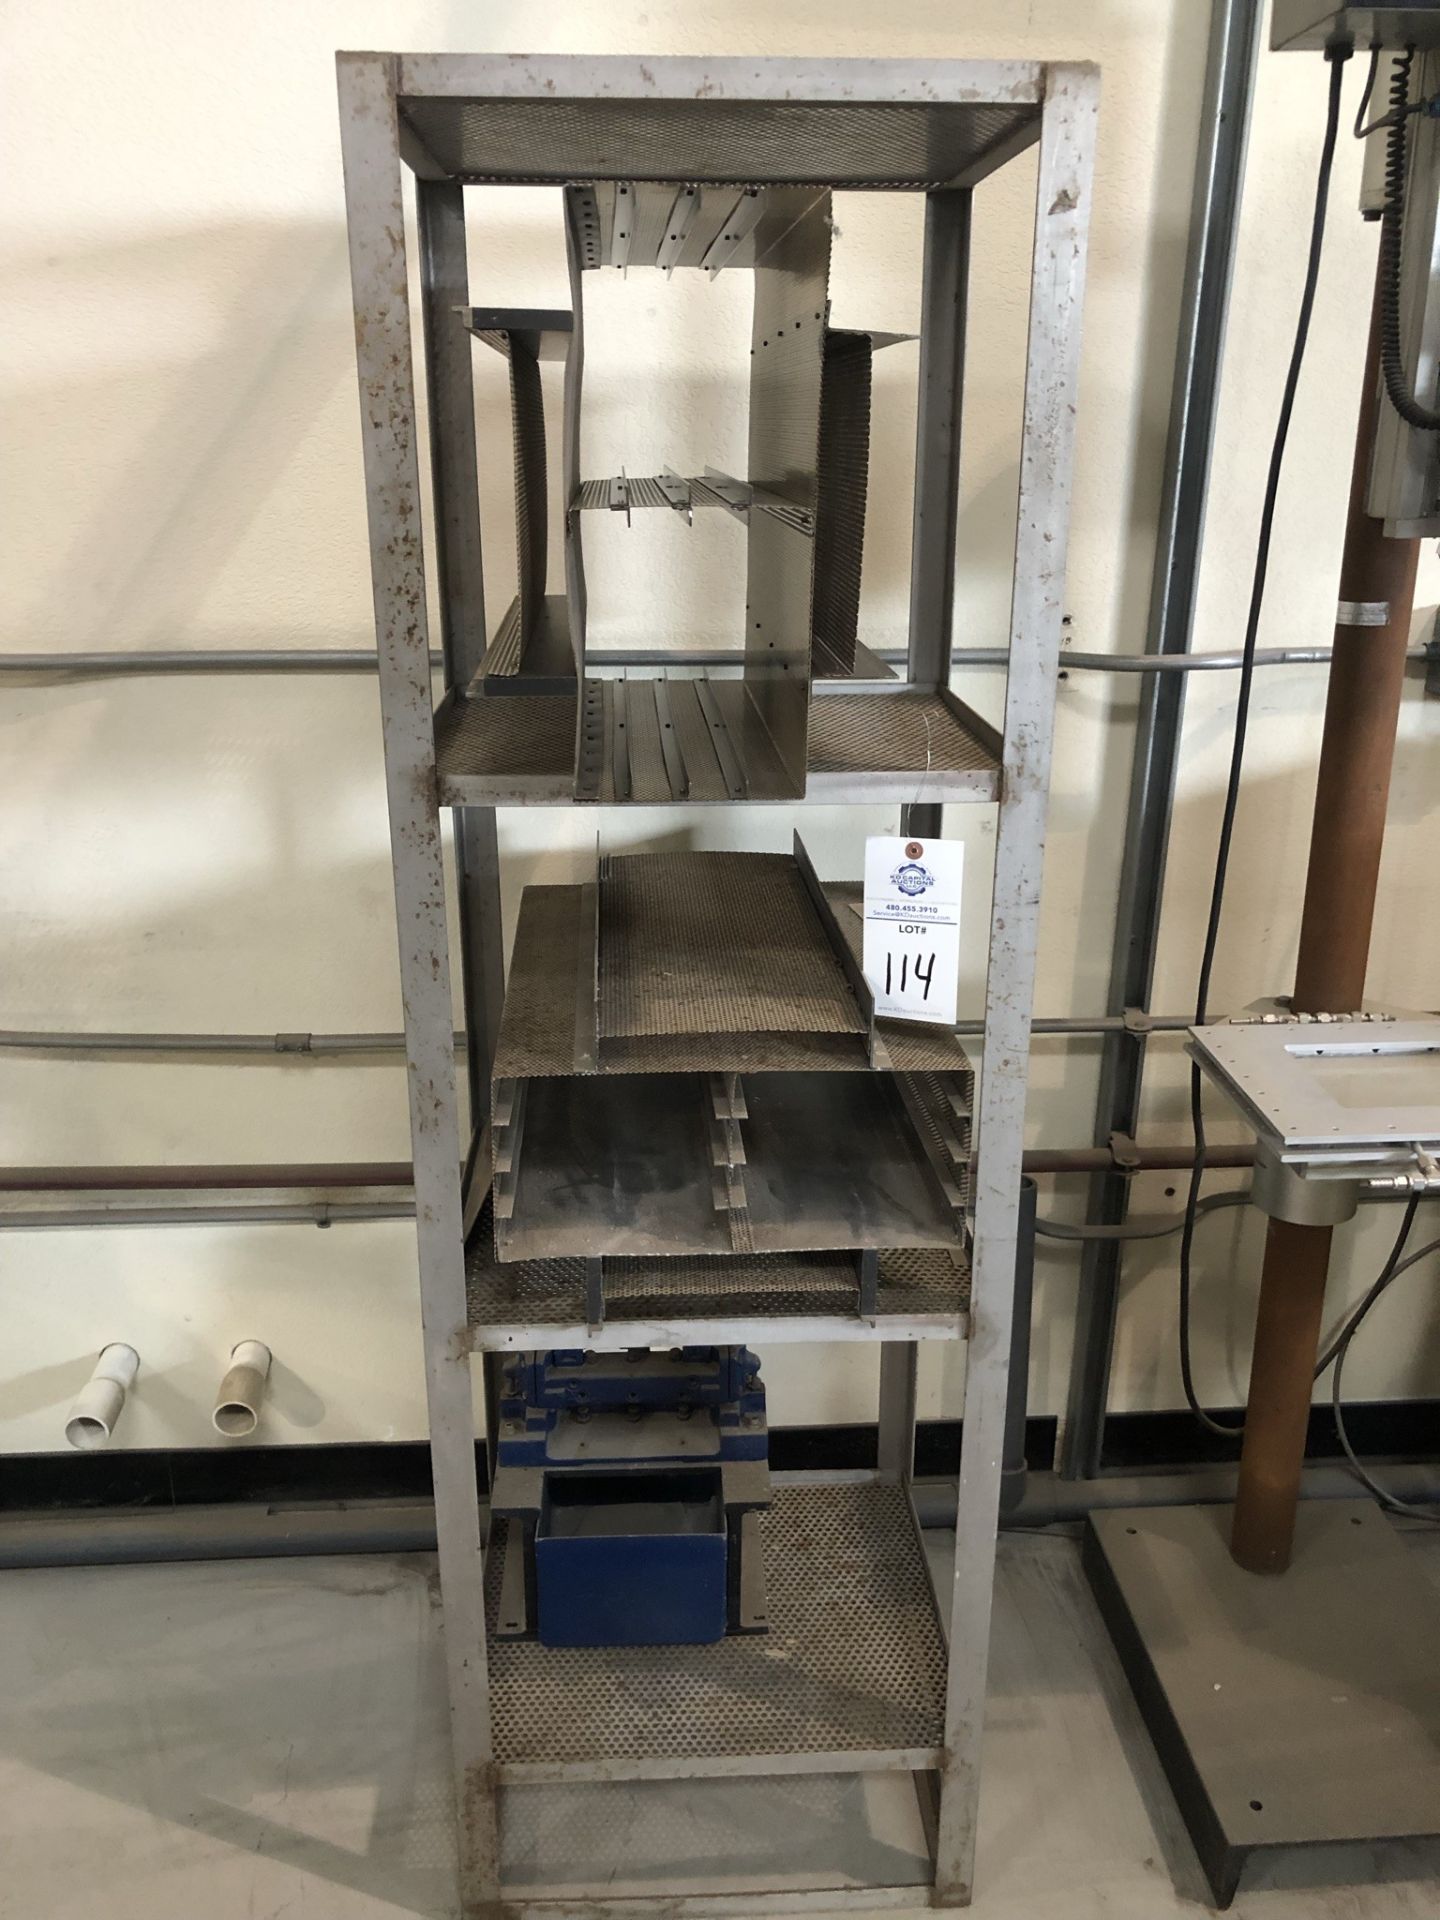 SS shelving unit with misc. furnace fixtures, 6" Pexto hand shear